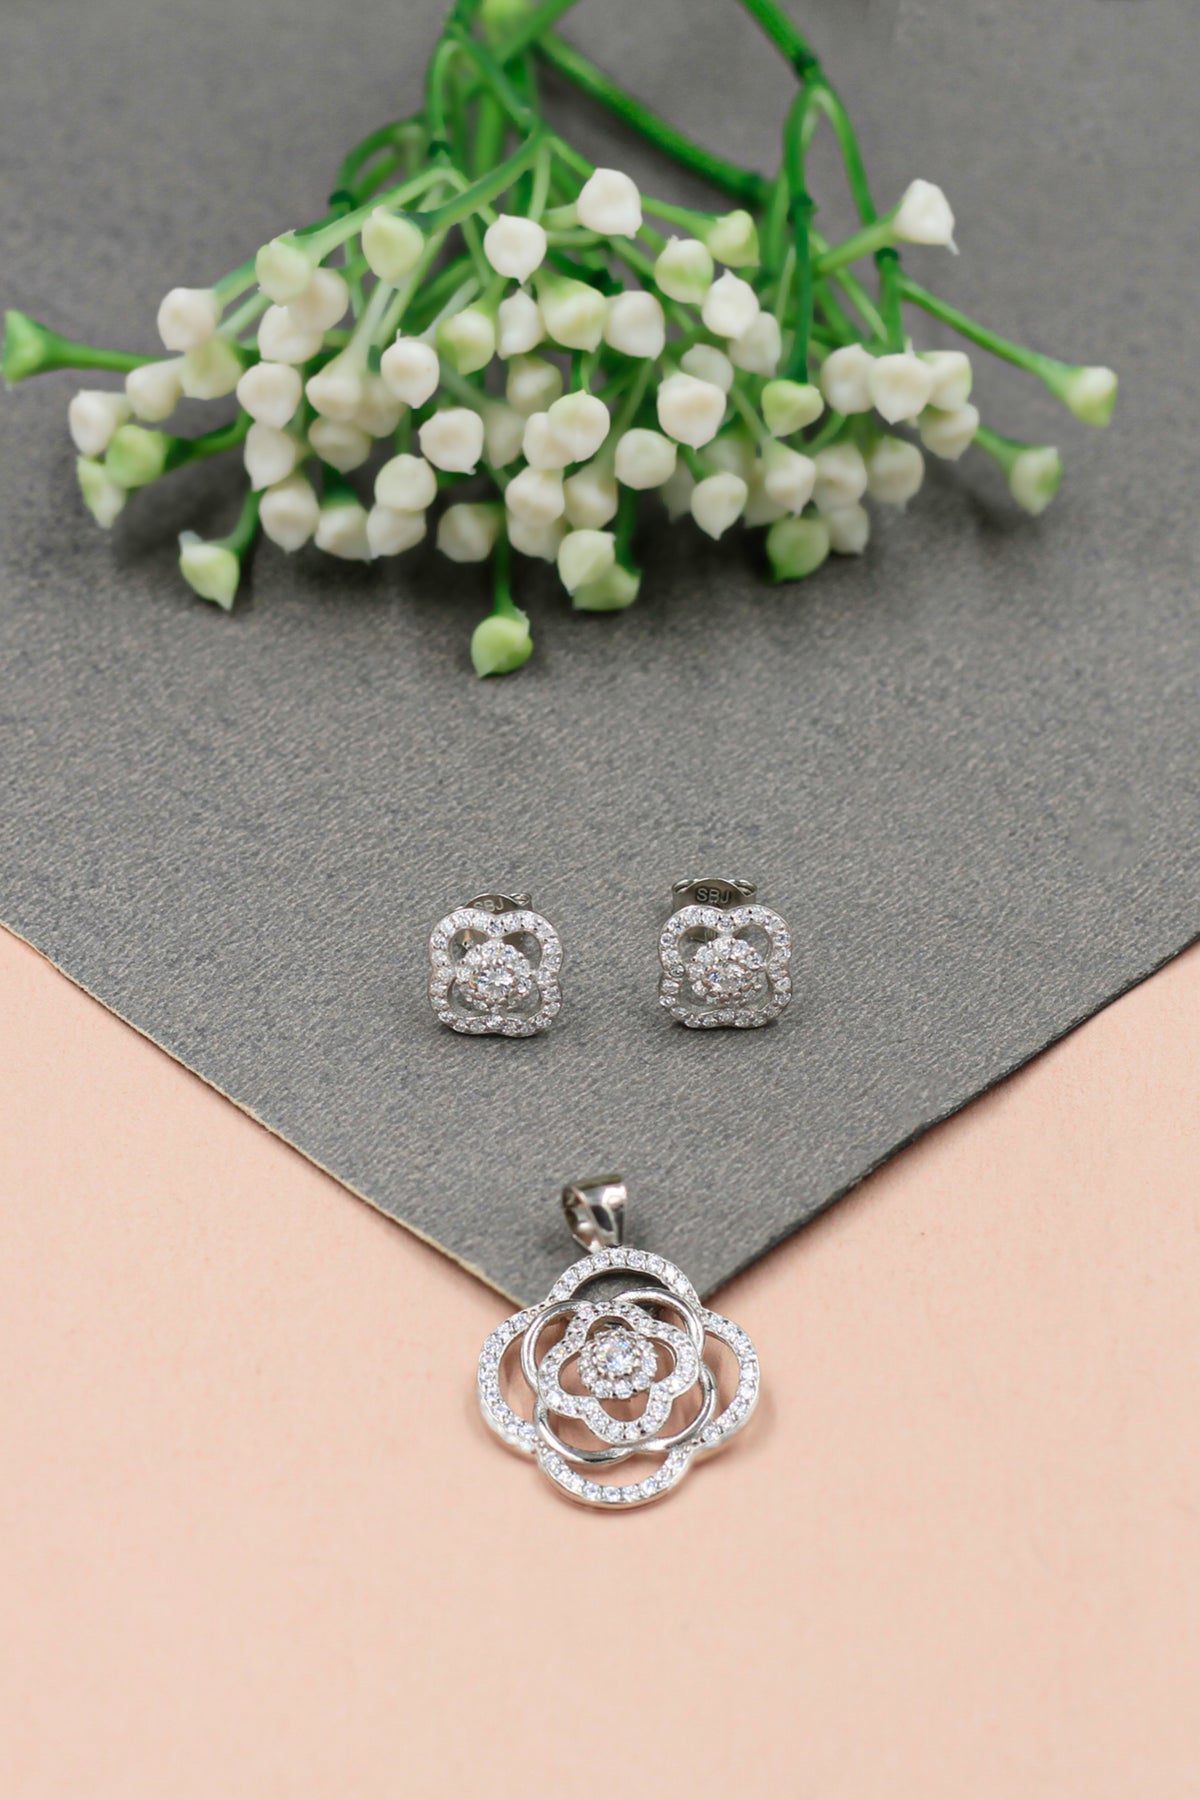 Cubic Zirconia Earring and Pendant Match